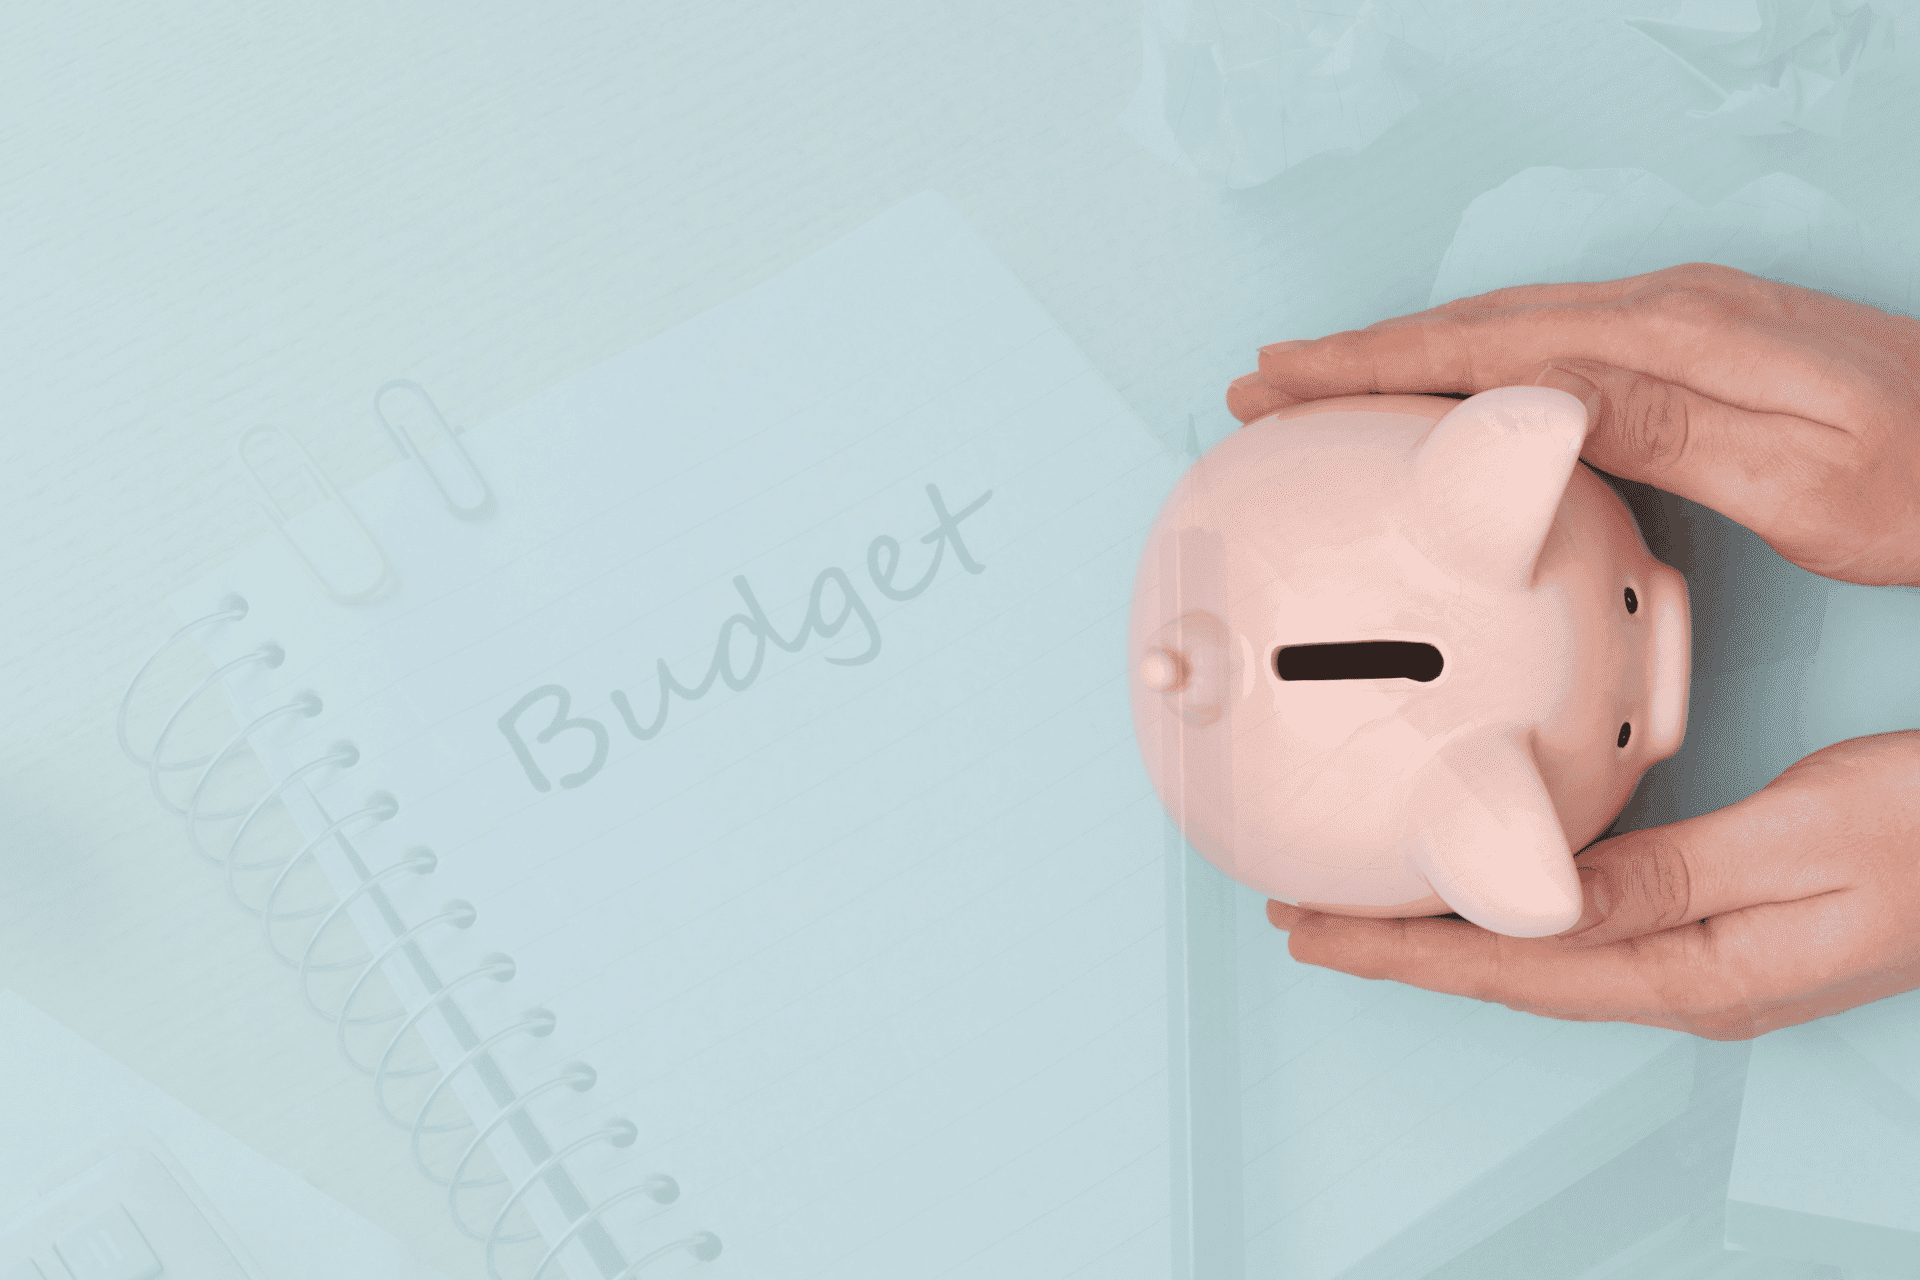 Why You Should Increase, Not Decrease, Your Digital Marketing Budget During Covid-19